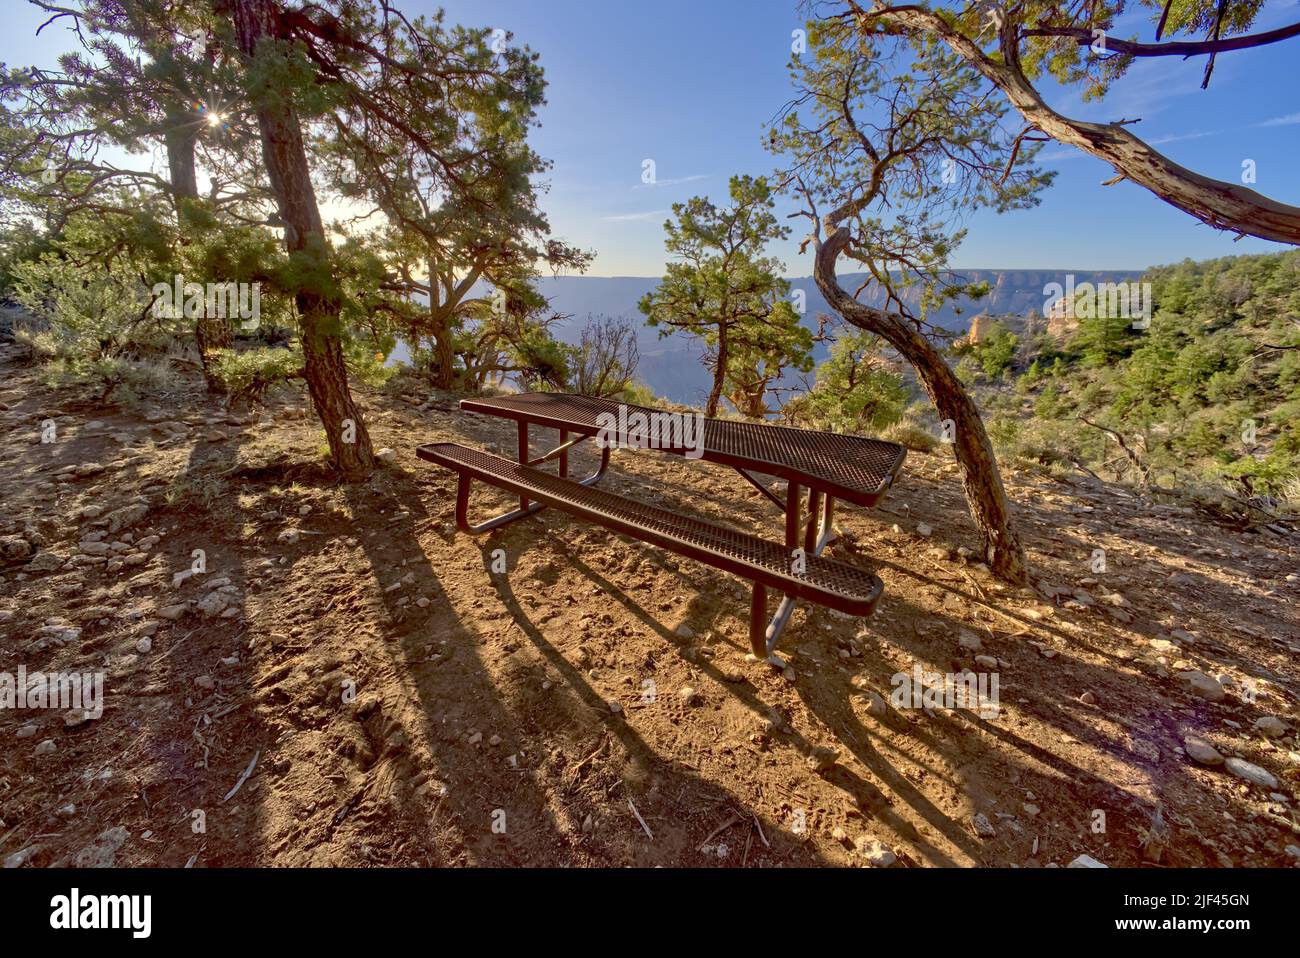 A lone picnic table just east of Shoshone Point at Grand Canyon Arizona. Public Park, no property release needed. Stock Photo